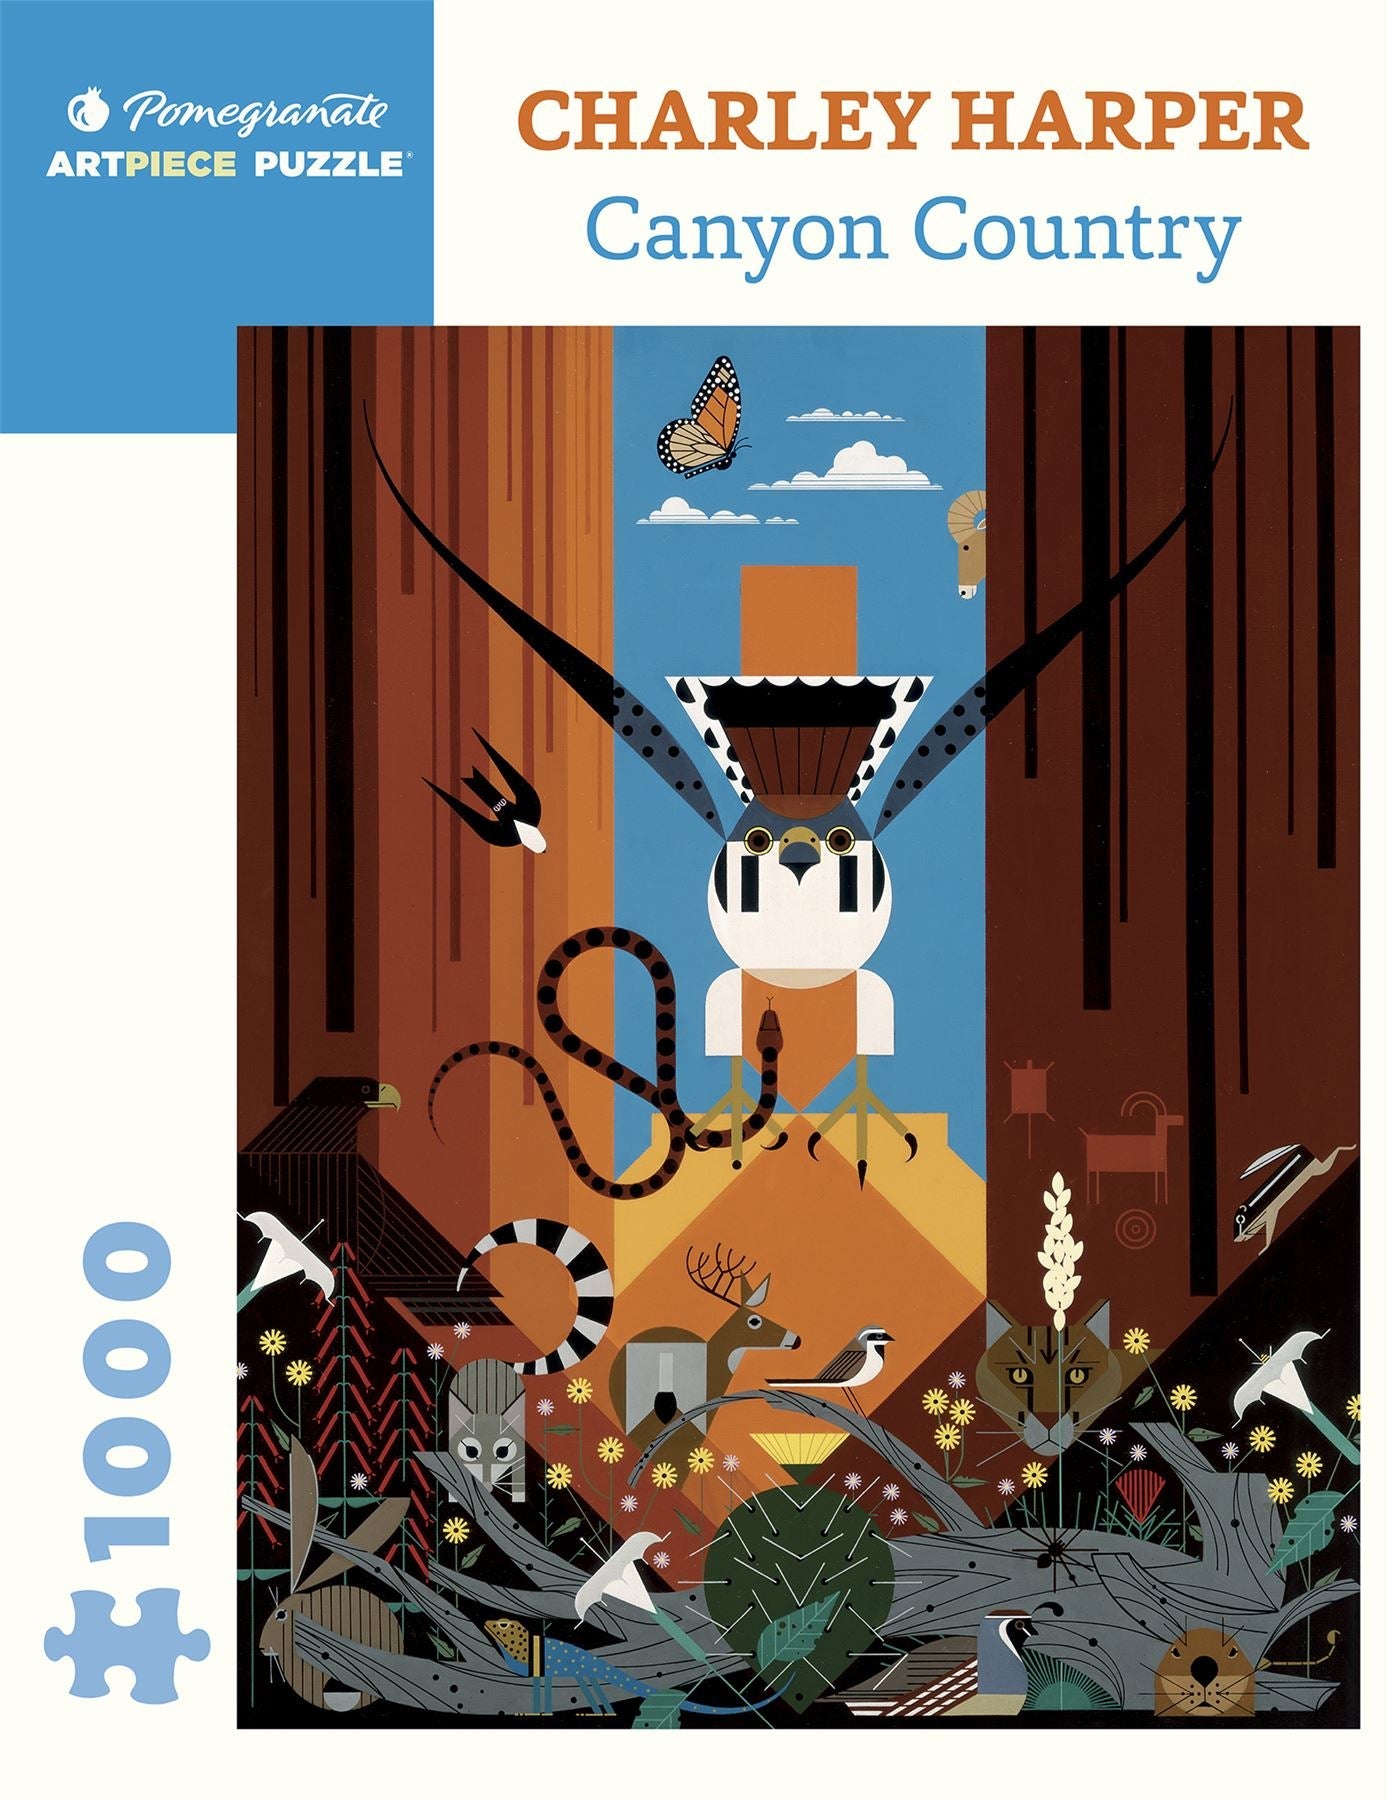 Charley Harper: Canyon Country 1000 Piece Jigsaw